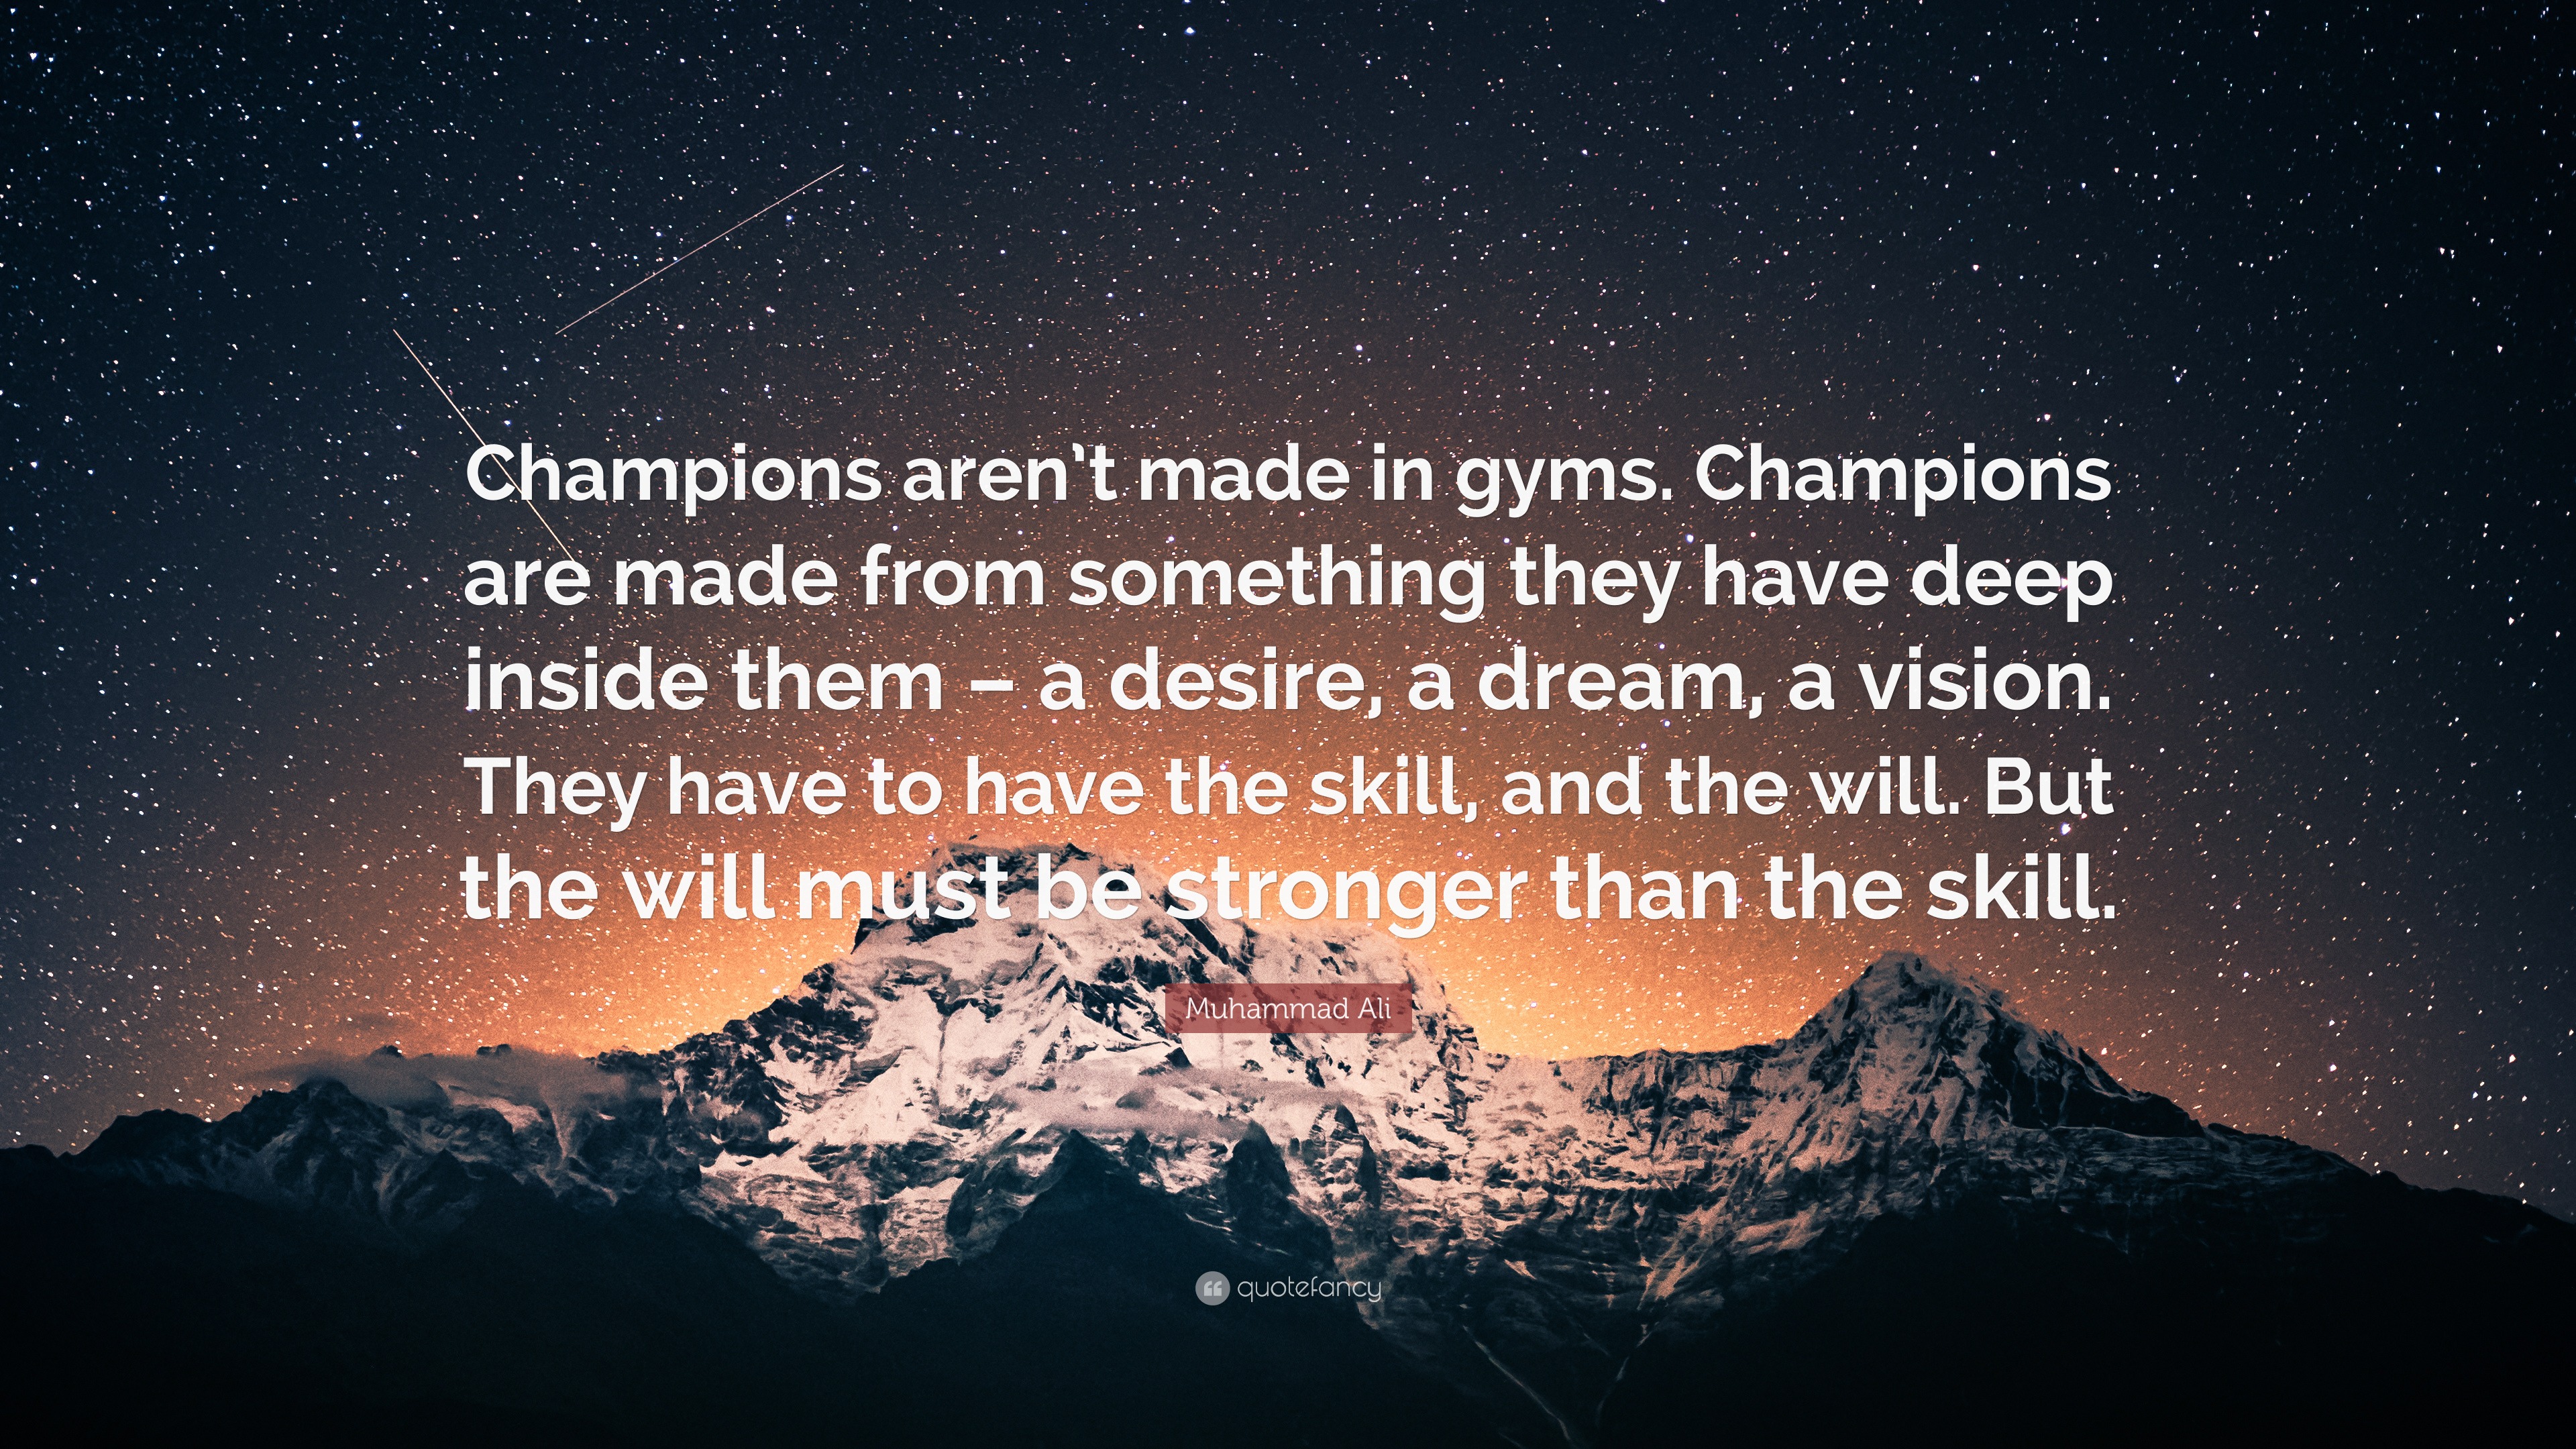 Muhammad Ali Quote: “Champions aren’t made in gyms. Champions are made